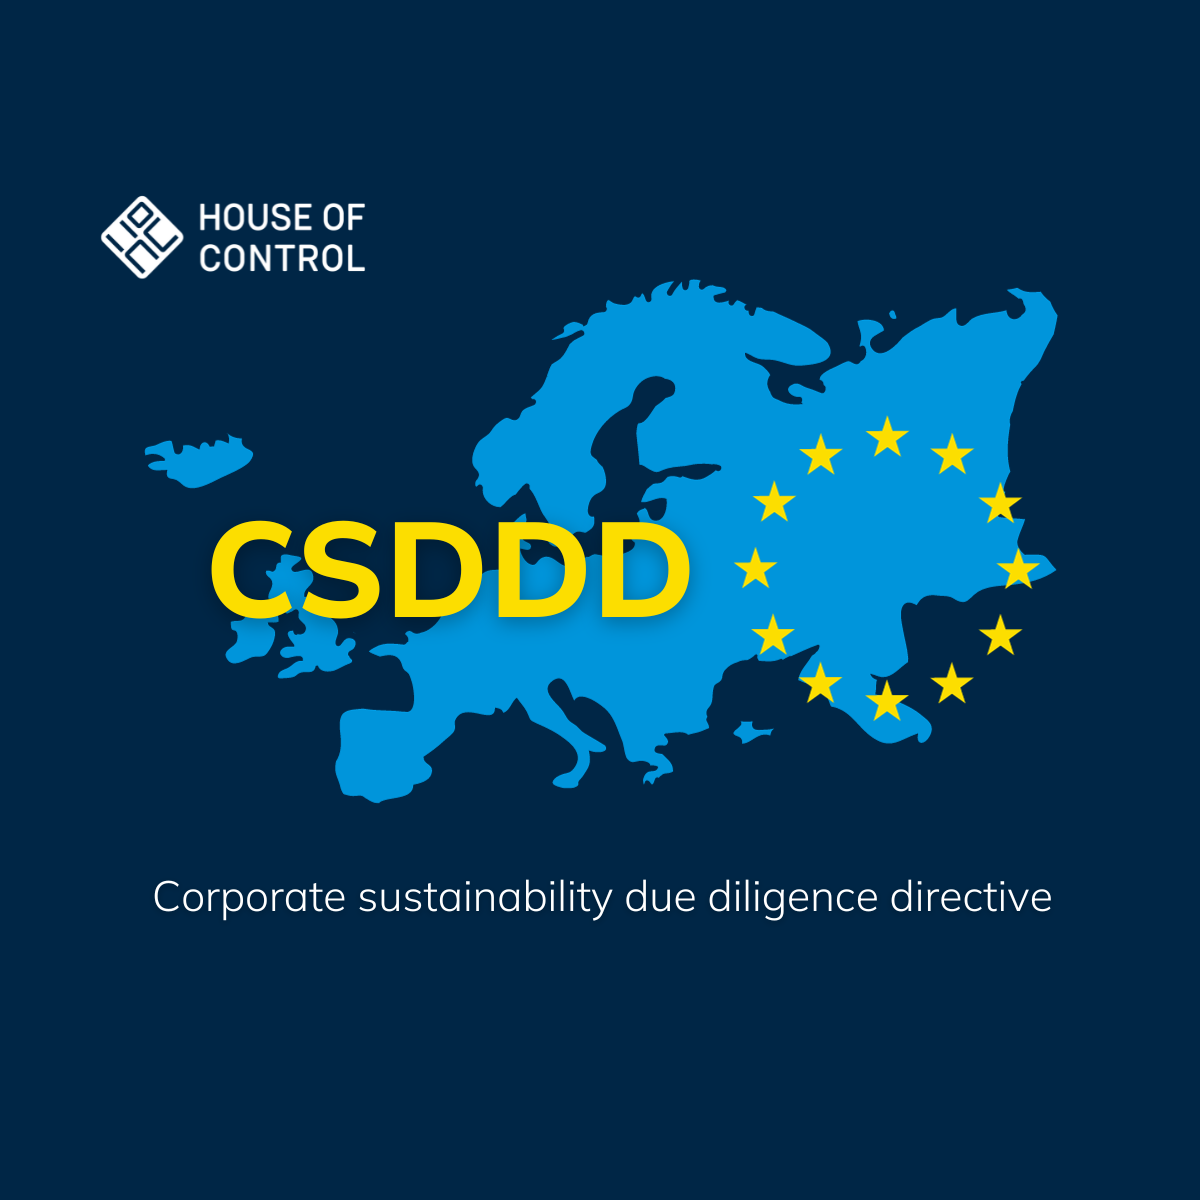 CSDDD - Corporate sustainability due diligence directive (LinkedIn Post)